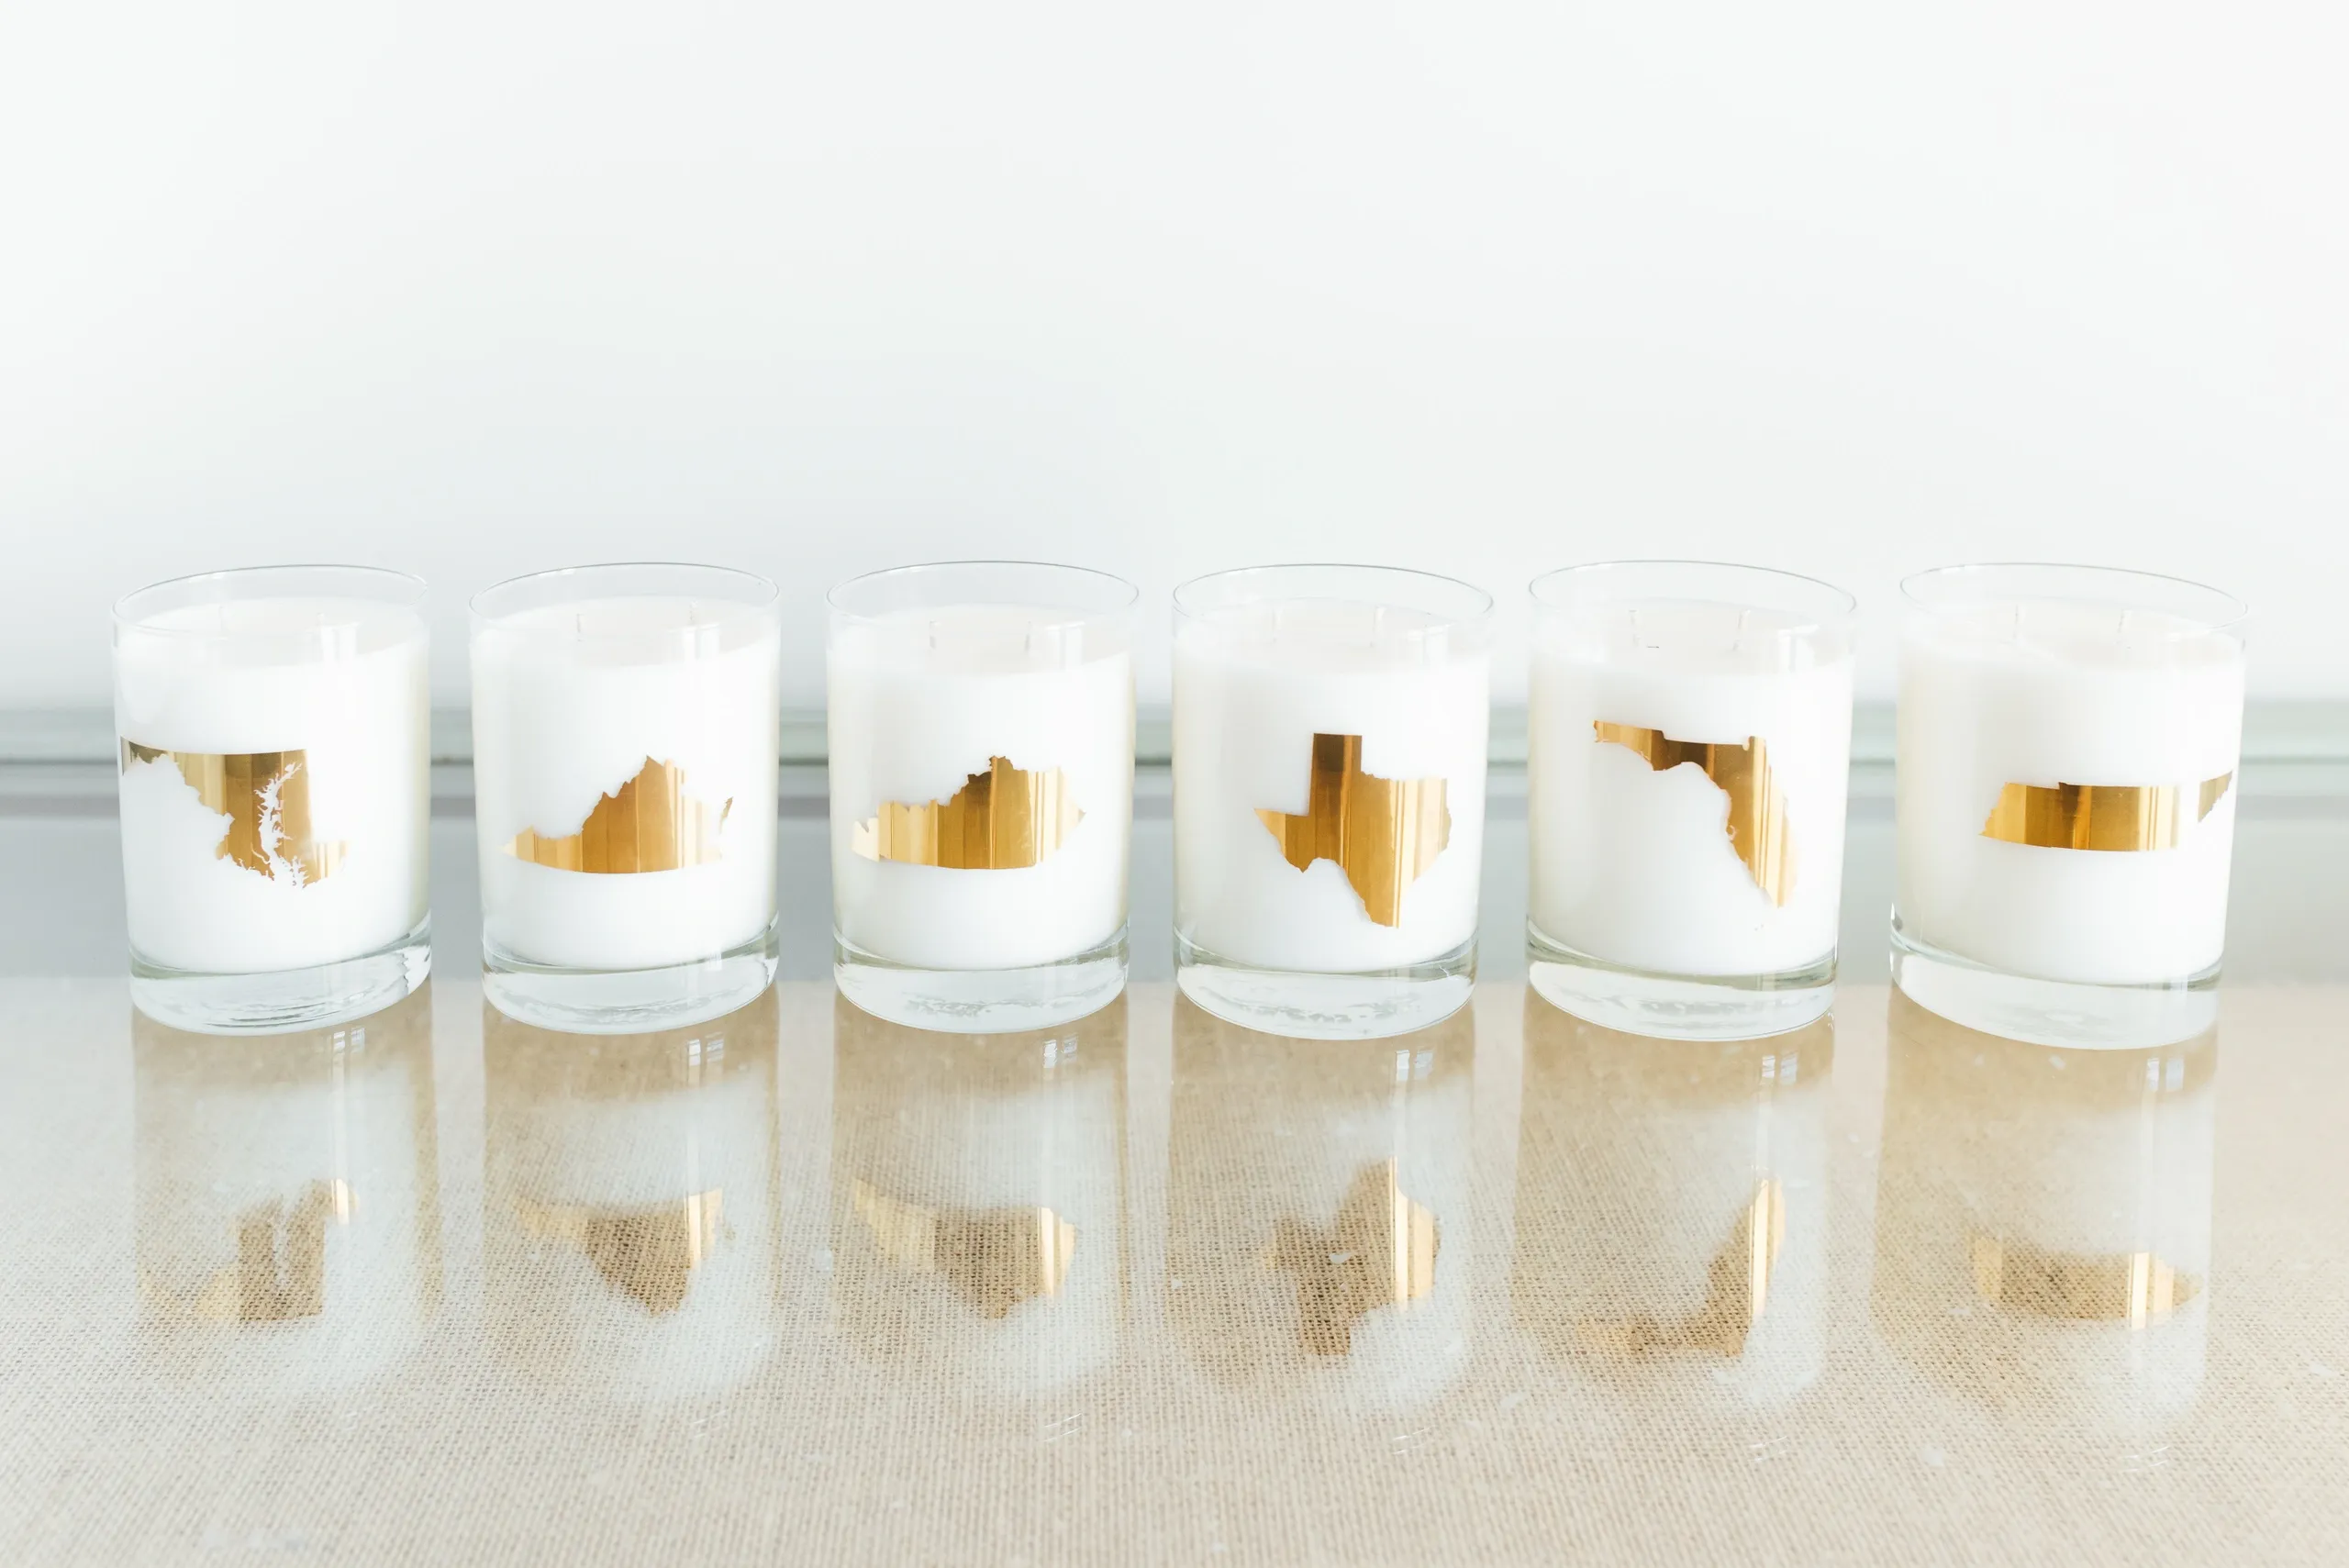 Collection of rocks glasses with state logos in 22k Gold MD, VA, KY, TX, FL, TN